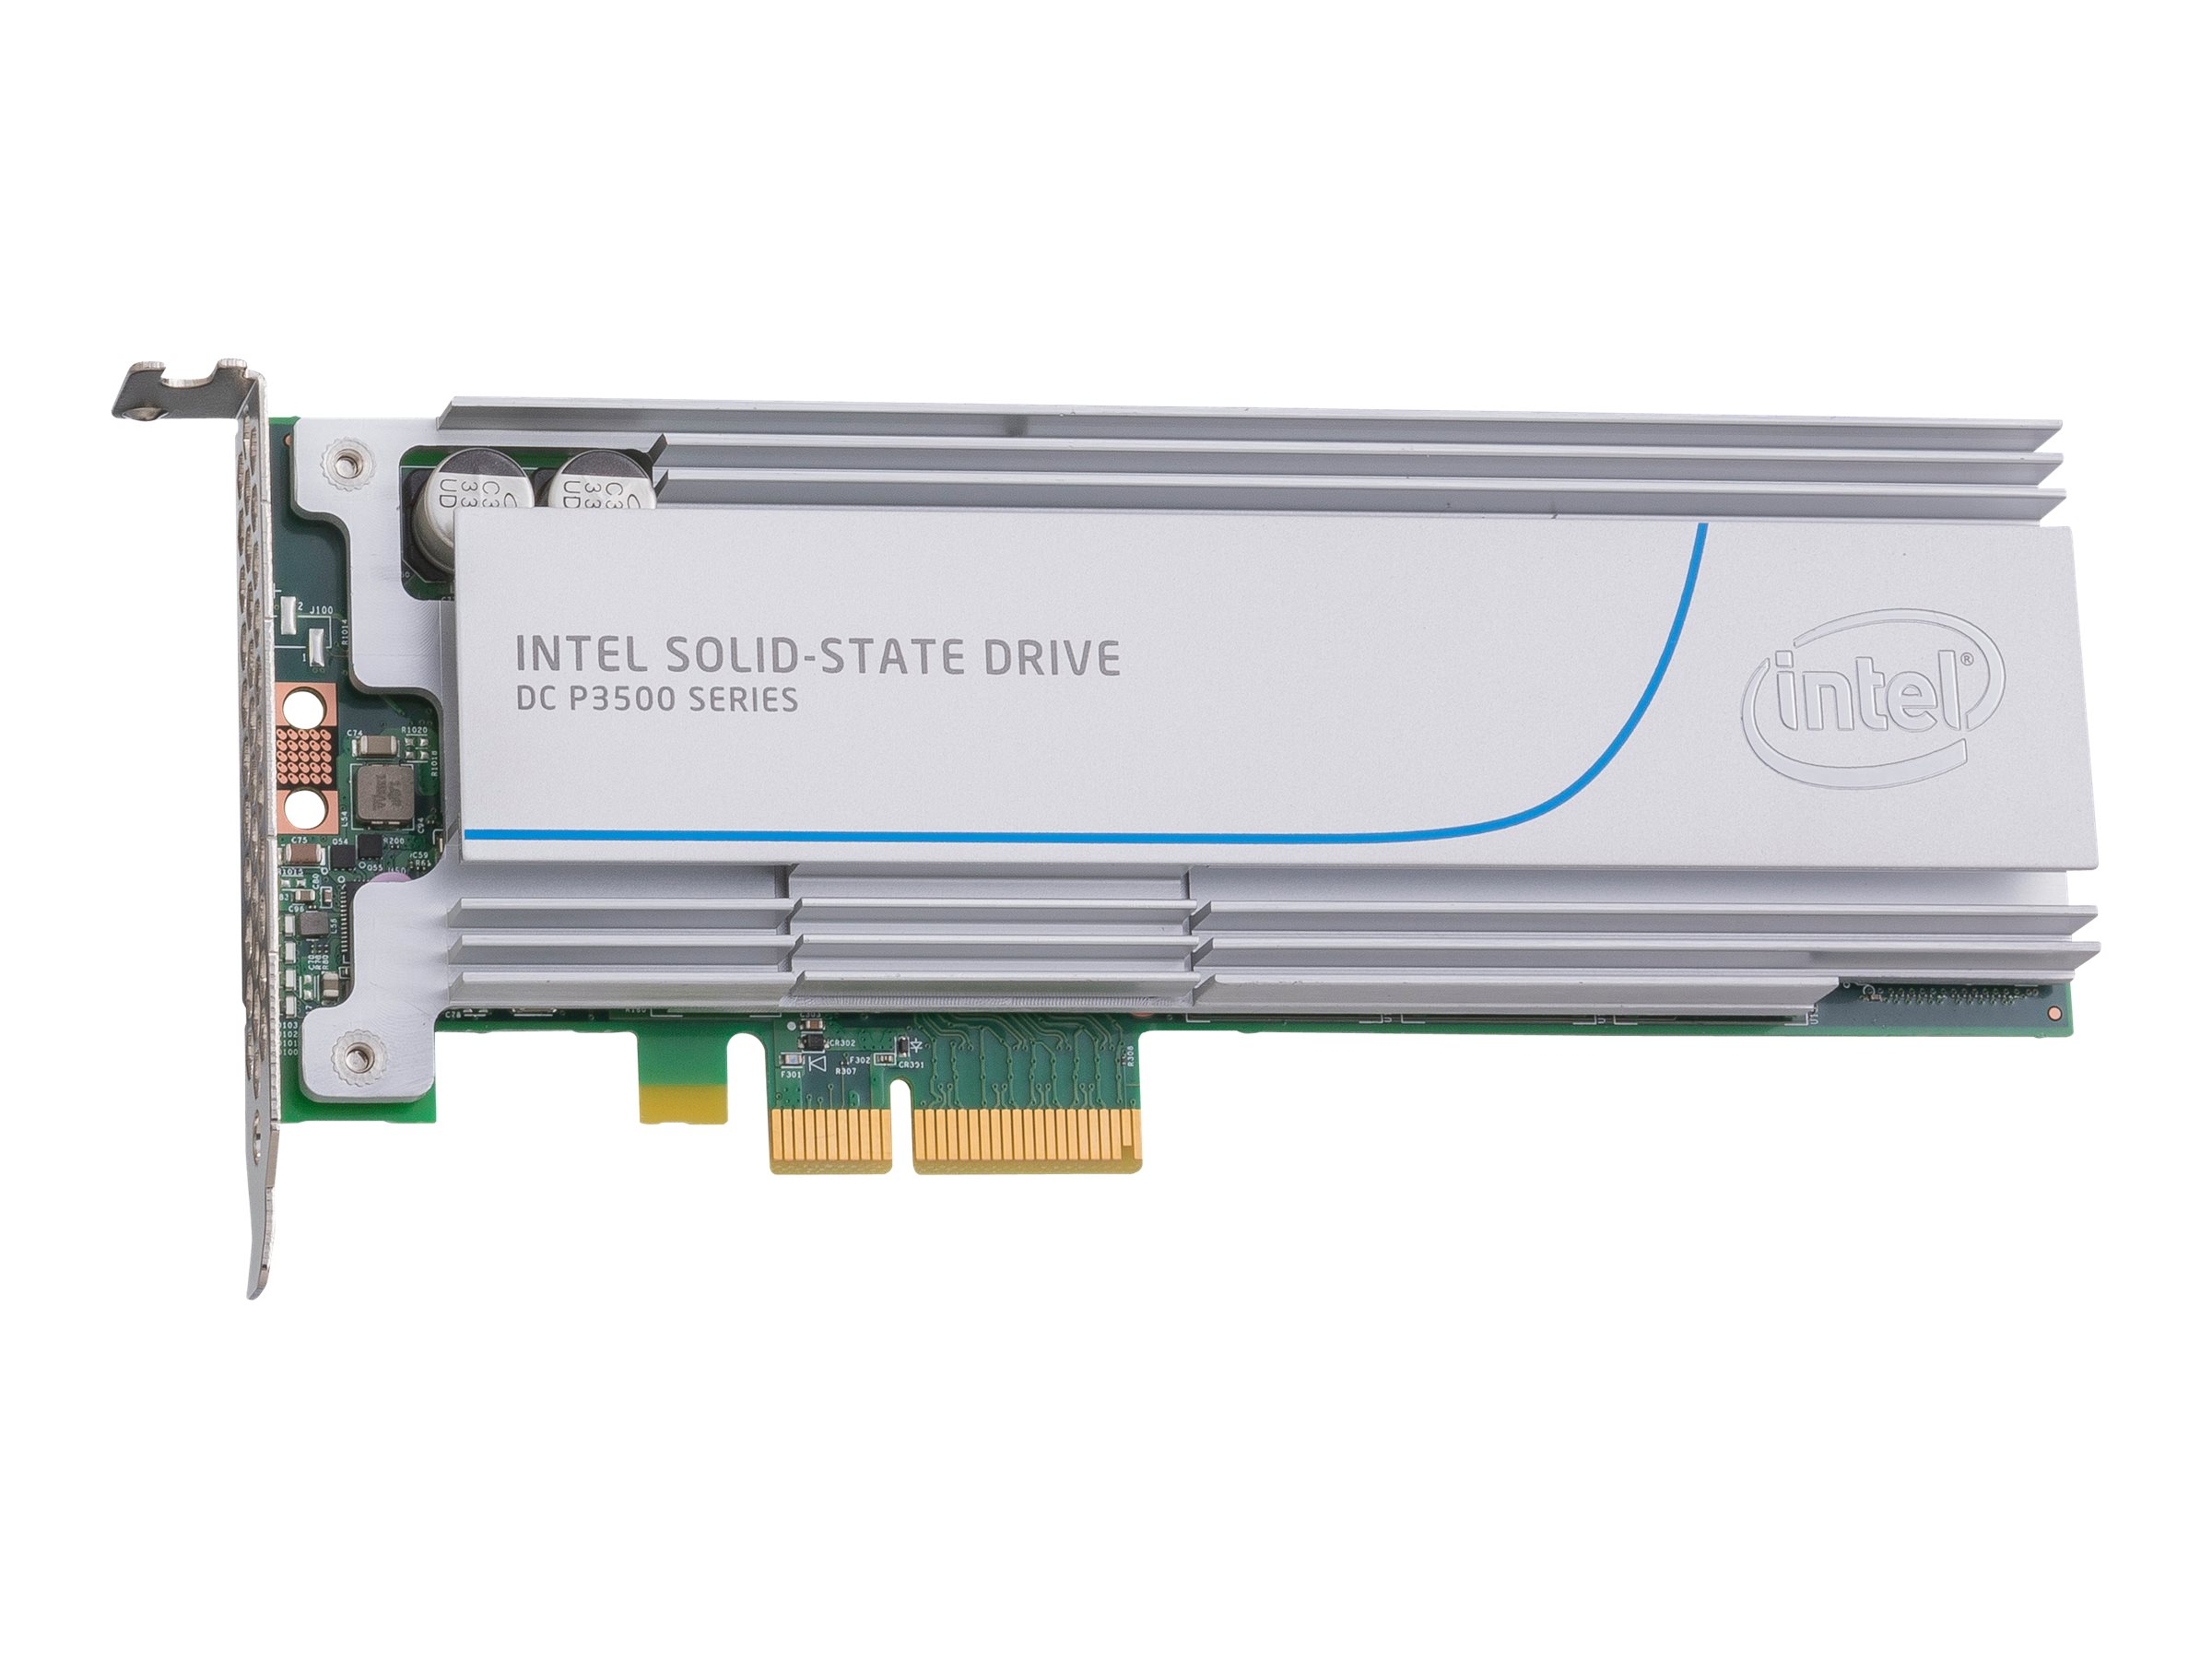 Intel Solid-State Drive DC P3500 Series - solid state drive - 1.2 TB - PCI Express 3.0 x4 (NVMe) - image 5 of 8